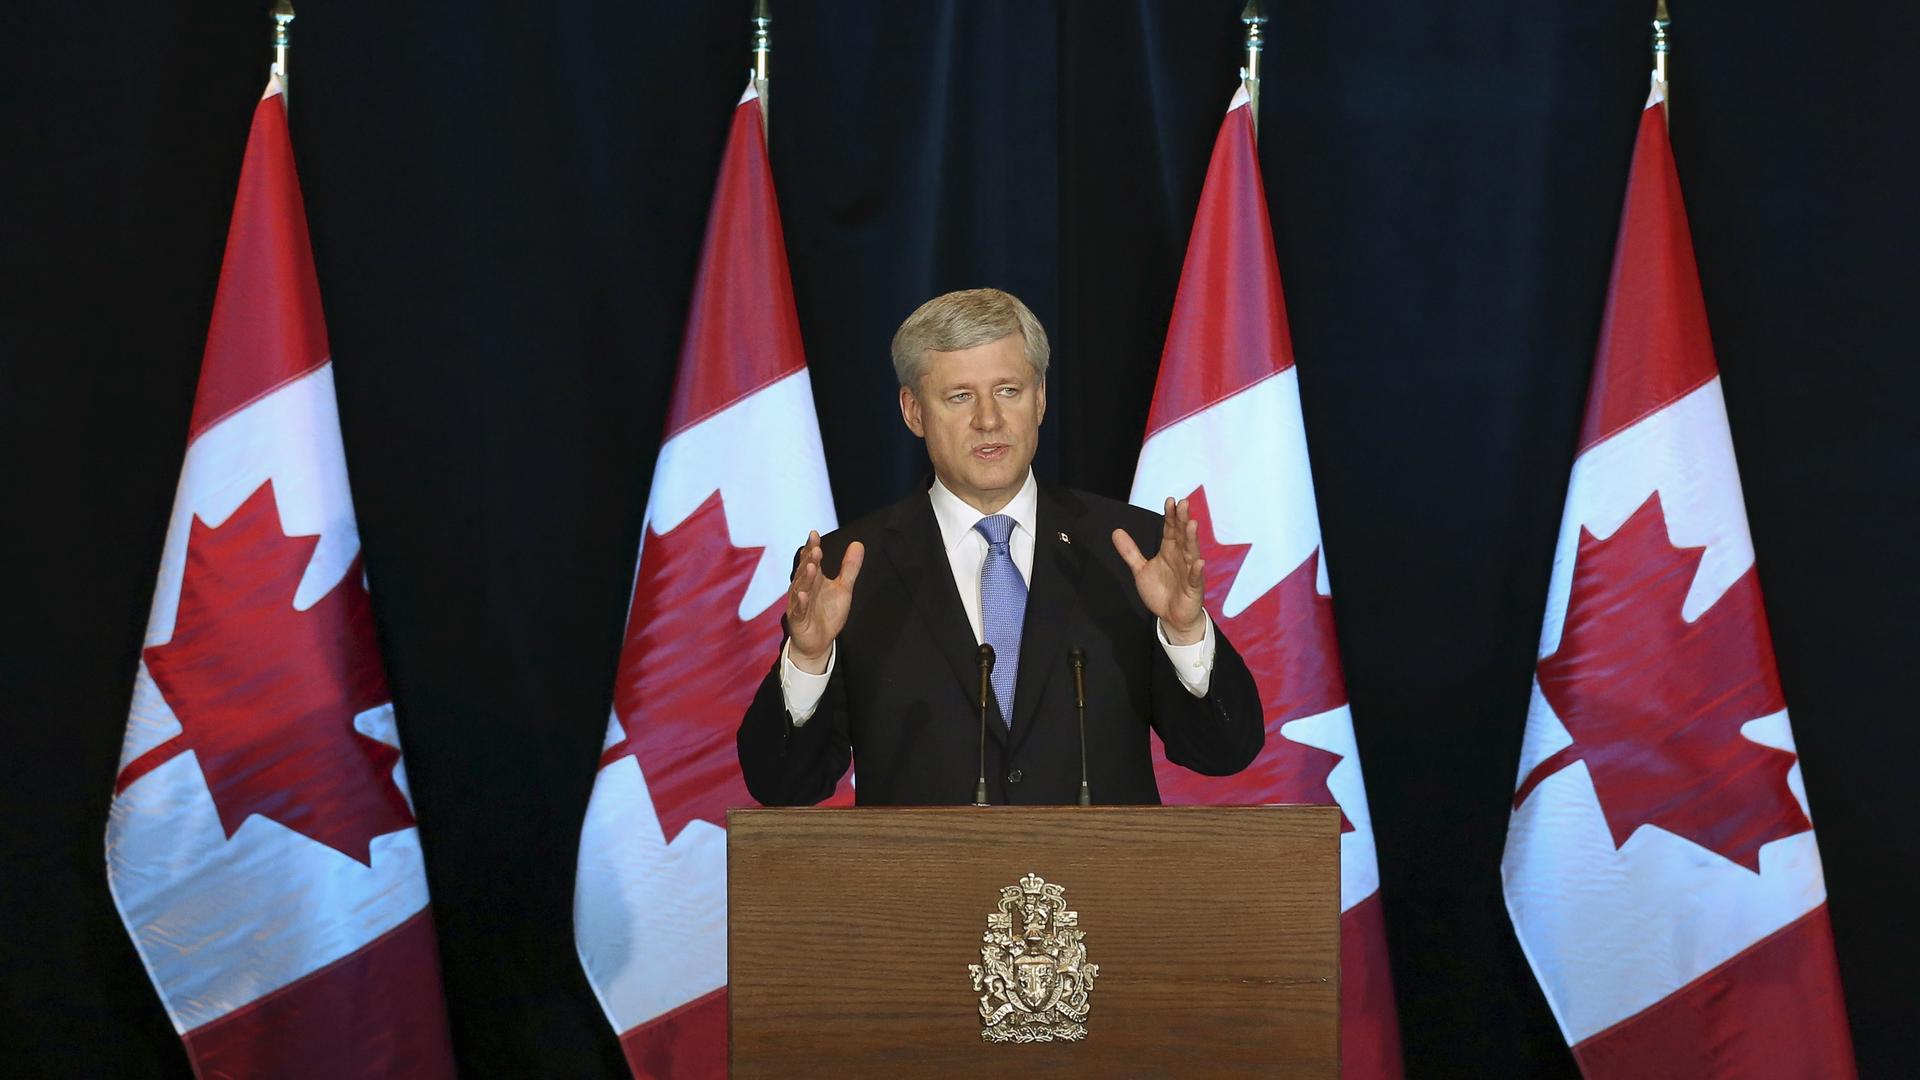 Canada's Prime Minister Stephen Harper speaks during a news conference in Ottawa, Canada on October 5, 2015.